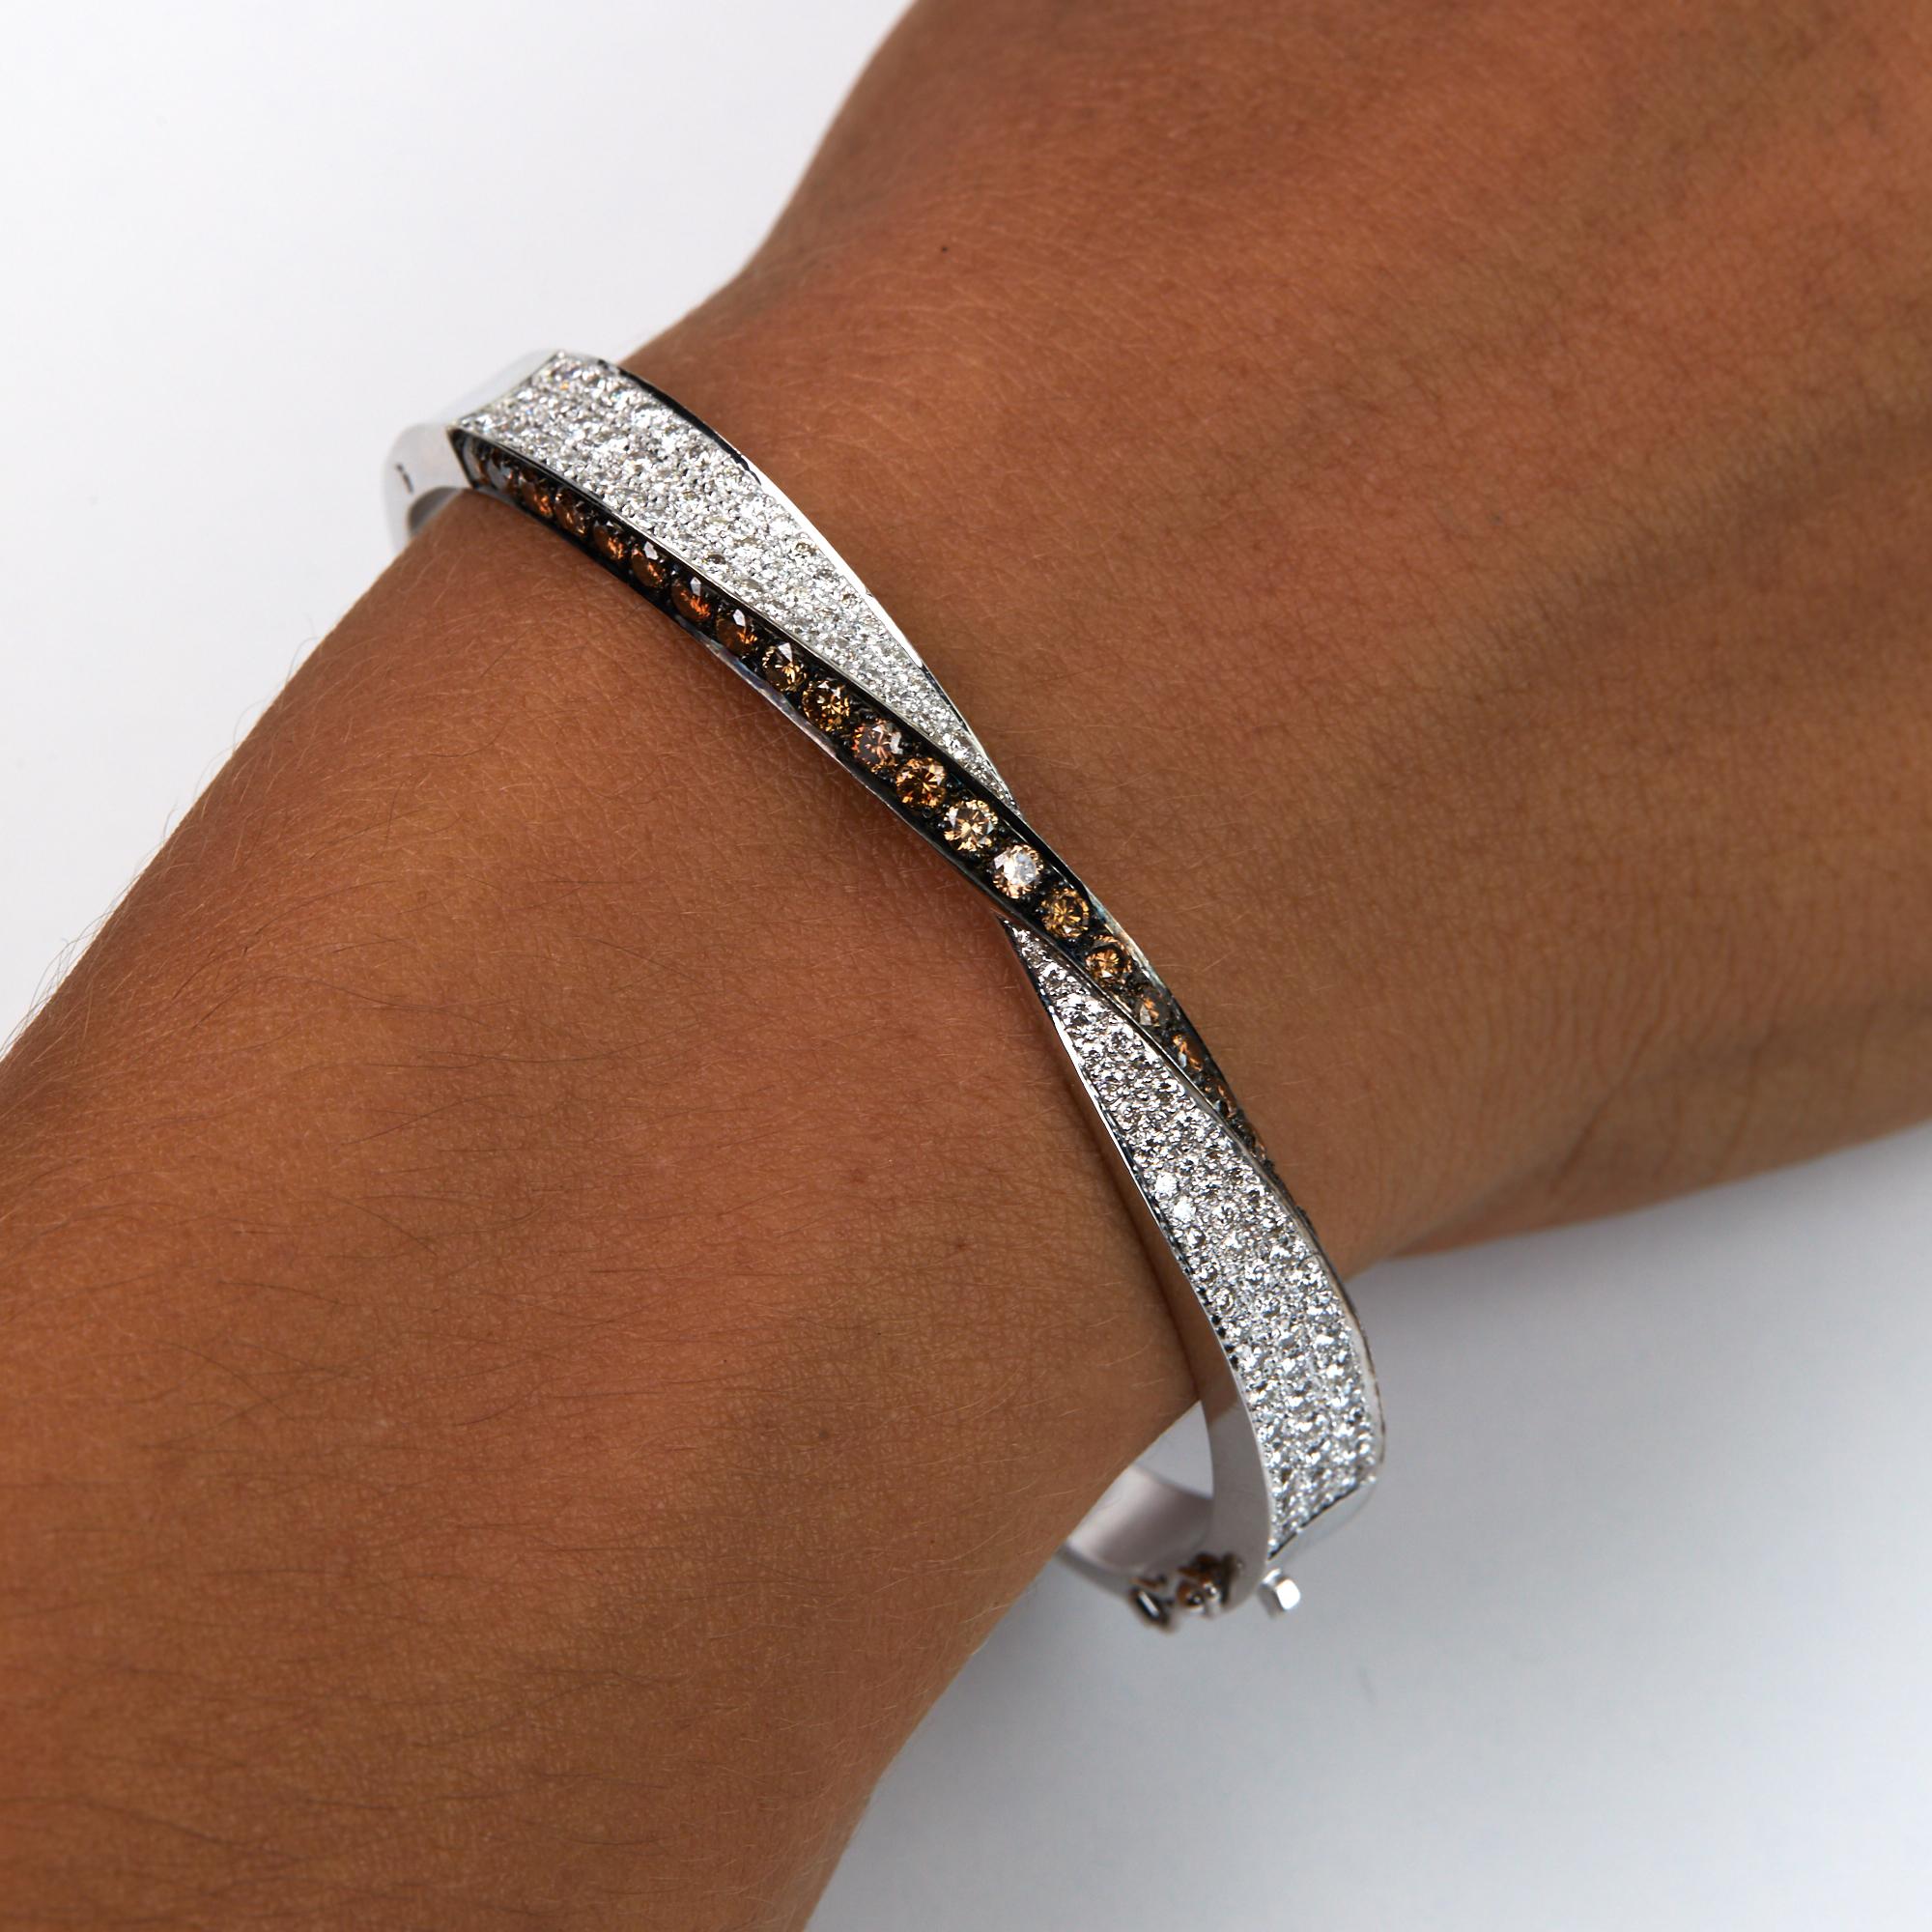 Brown And White Diamond Bangle Bracelet.  This one of a kind Modern Bracelet was made for us in Hong Kong using 1.39 carats of brilliant round cut  fancy brown diamonds and 1.32 carats of brilliant round cut white diamonds.  The white diamonds are